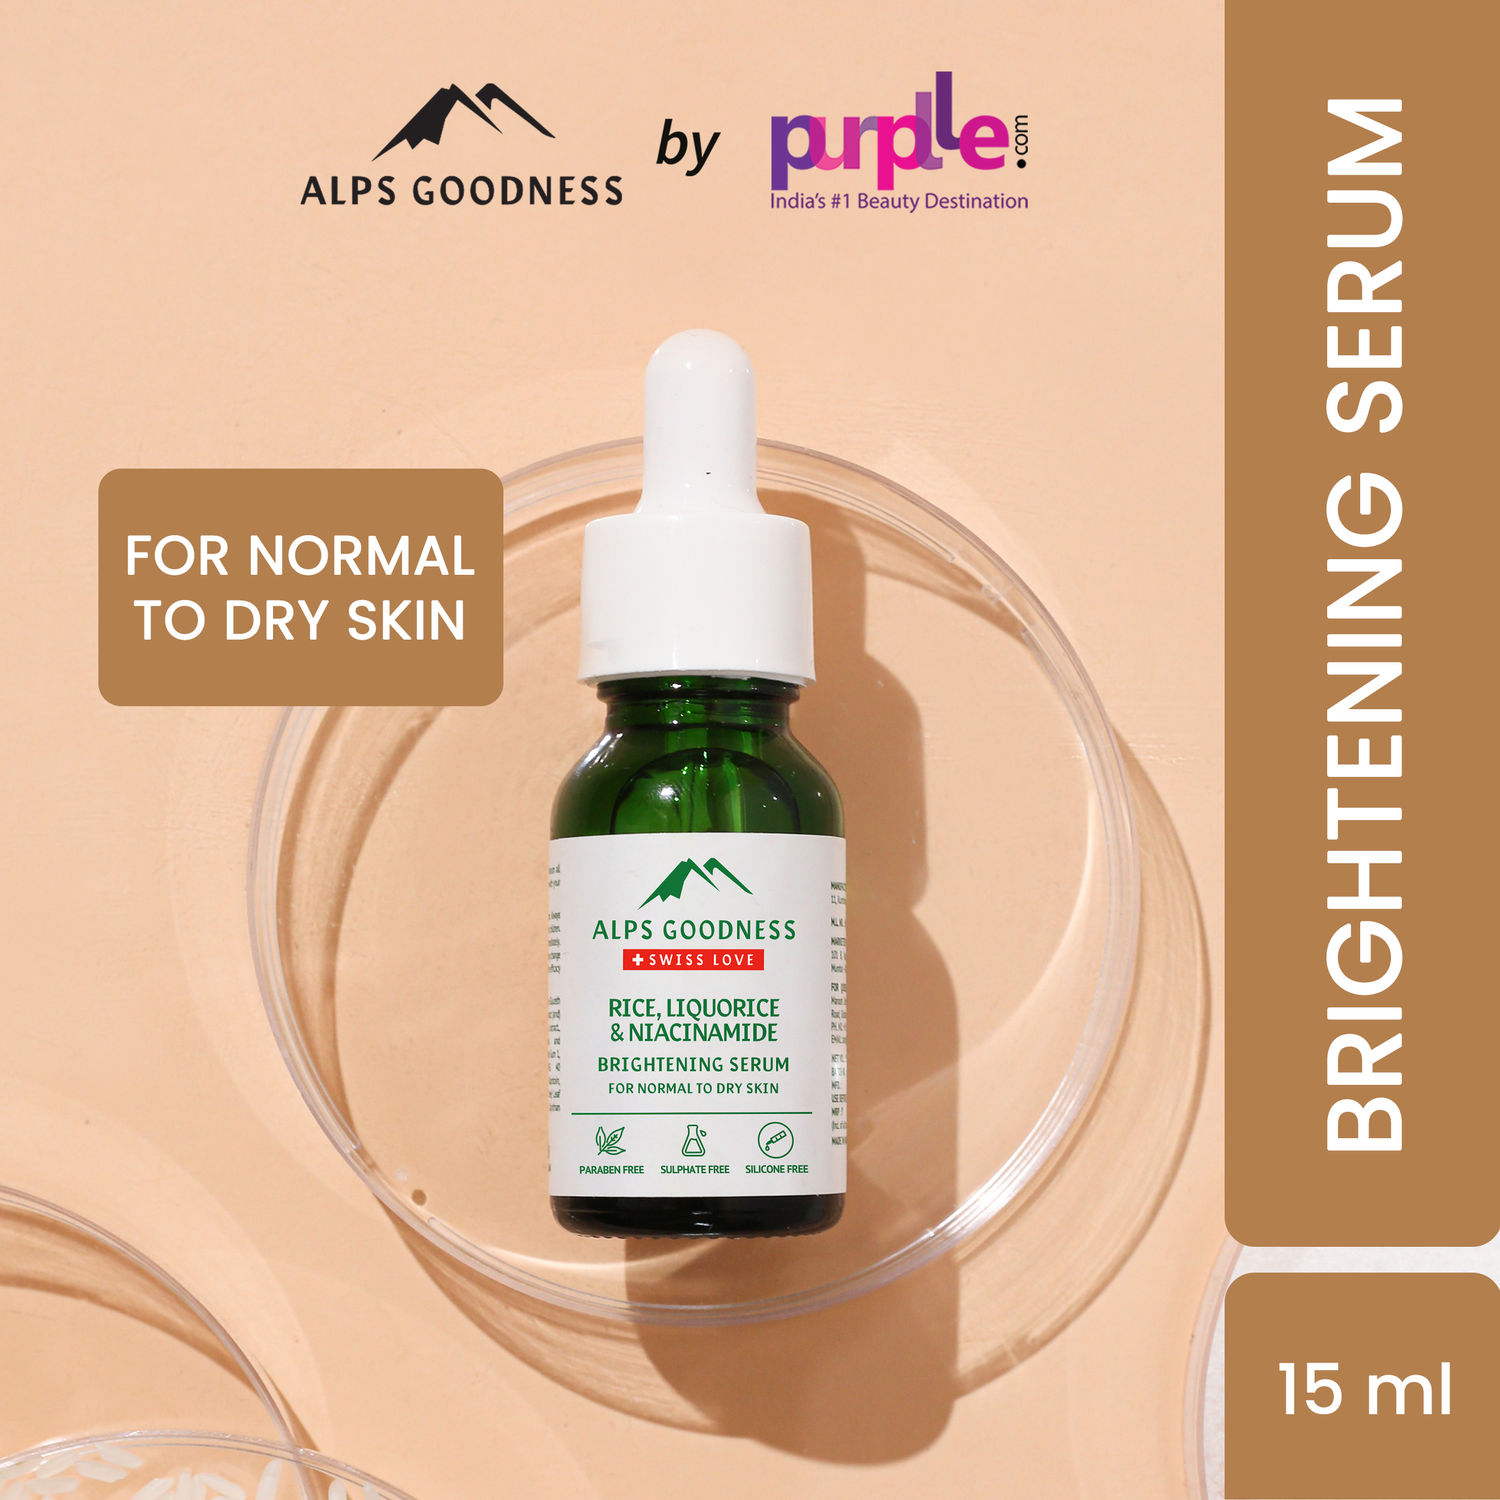 Buy Alps Goodness Rice Liquorice & Niacinamide Brightening Serum for Normal to Dry Skin (15 ml)| Paraben, Sulphate, Silicone, Mineral Oil Free| Vegan|For Dry Skin| Face Serum - Purplle